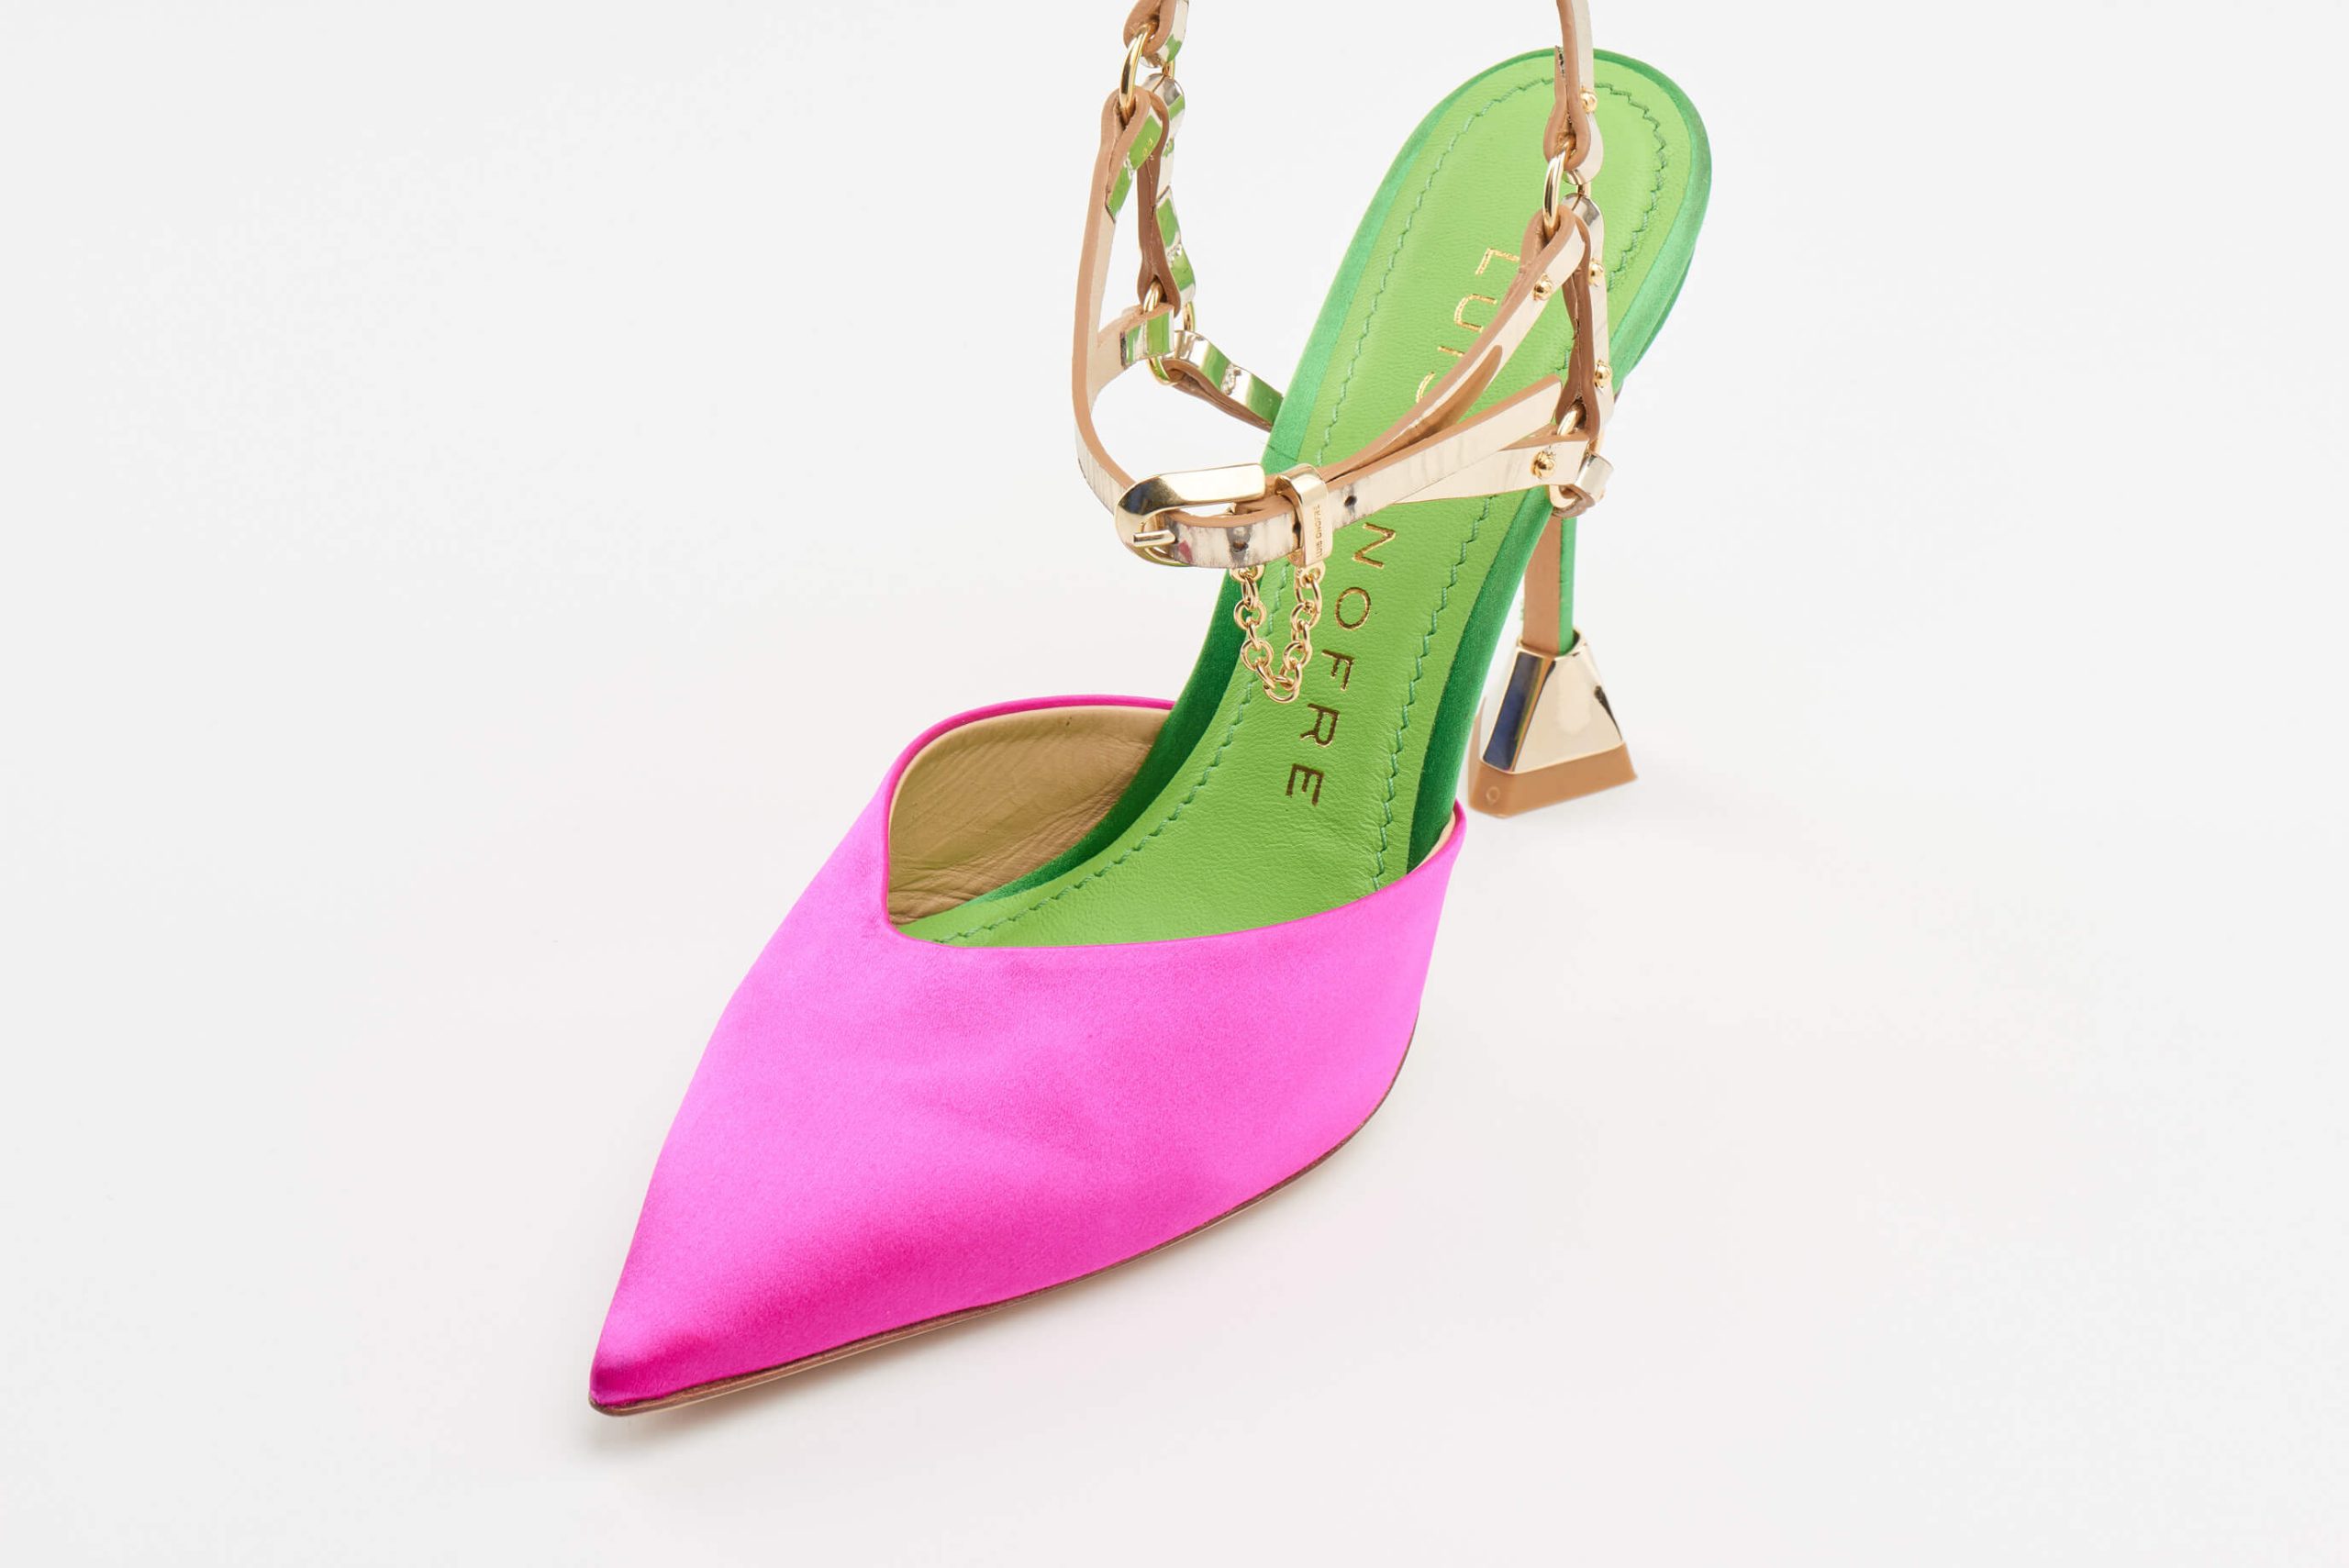 Luis Onofre Portuguese Shoes FW22 – 5373_01MF – Hades pink and green-5